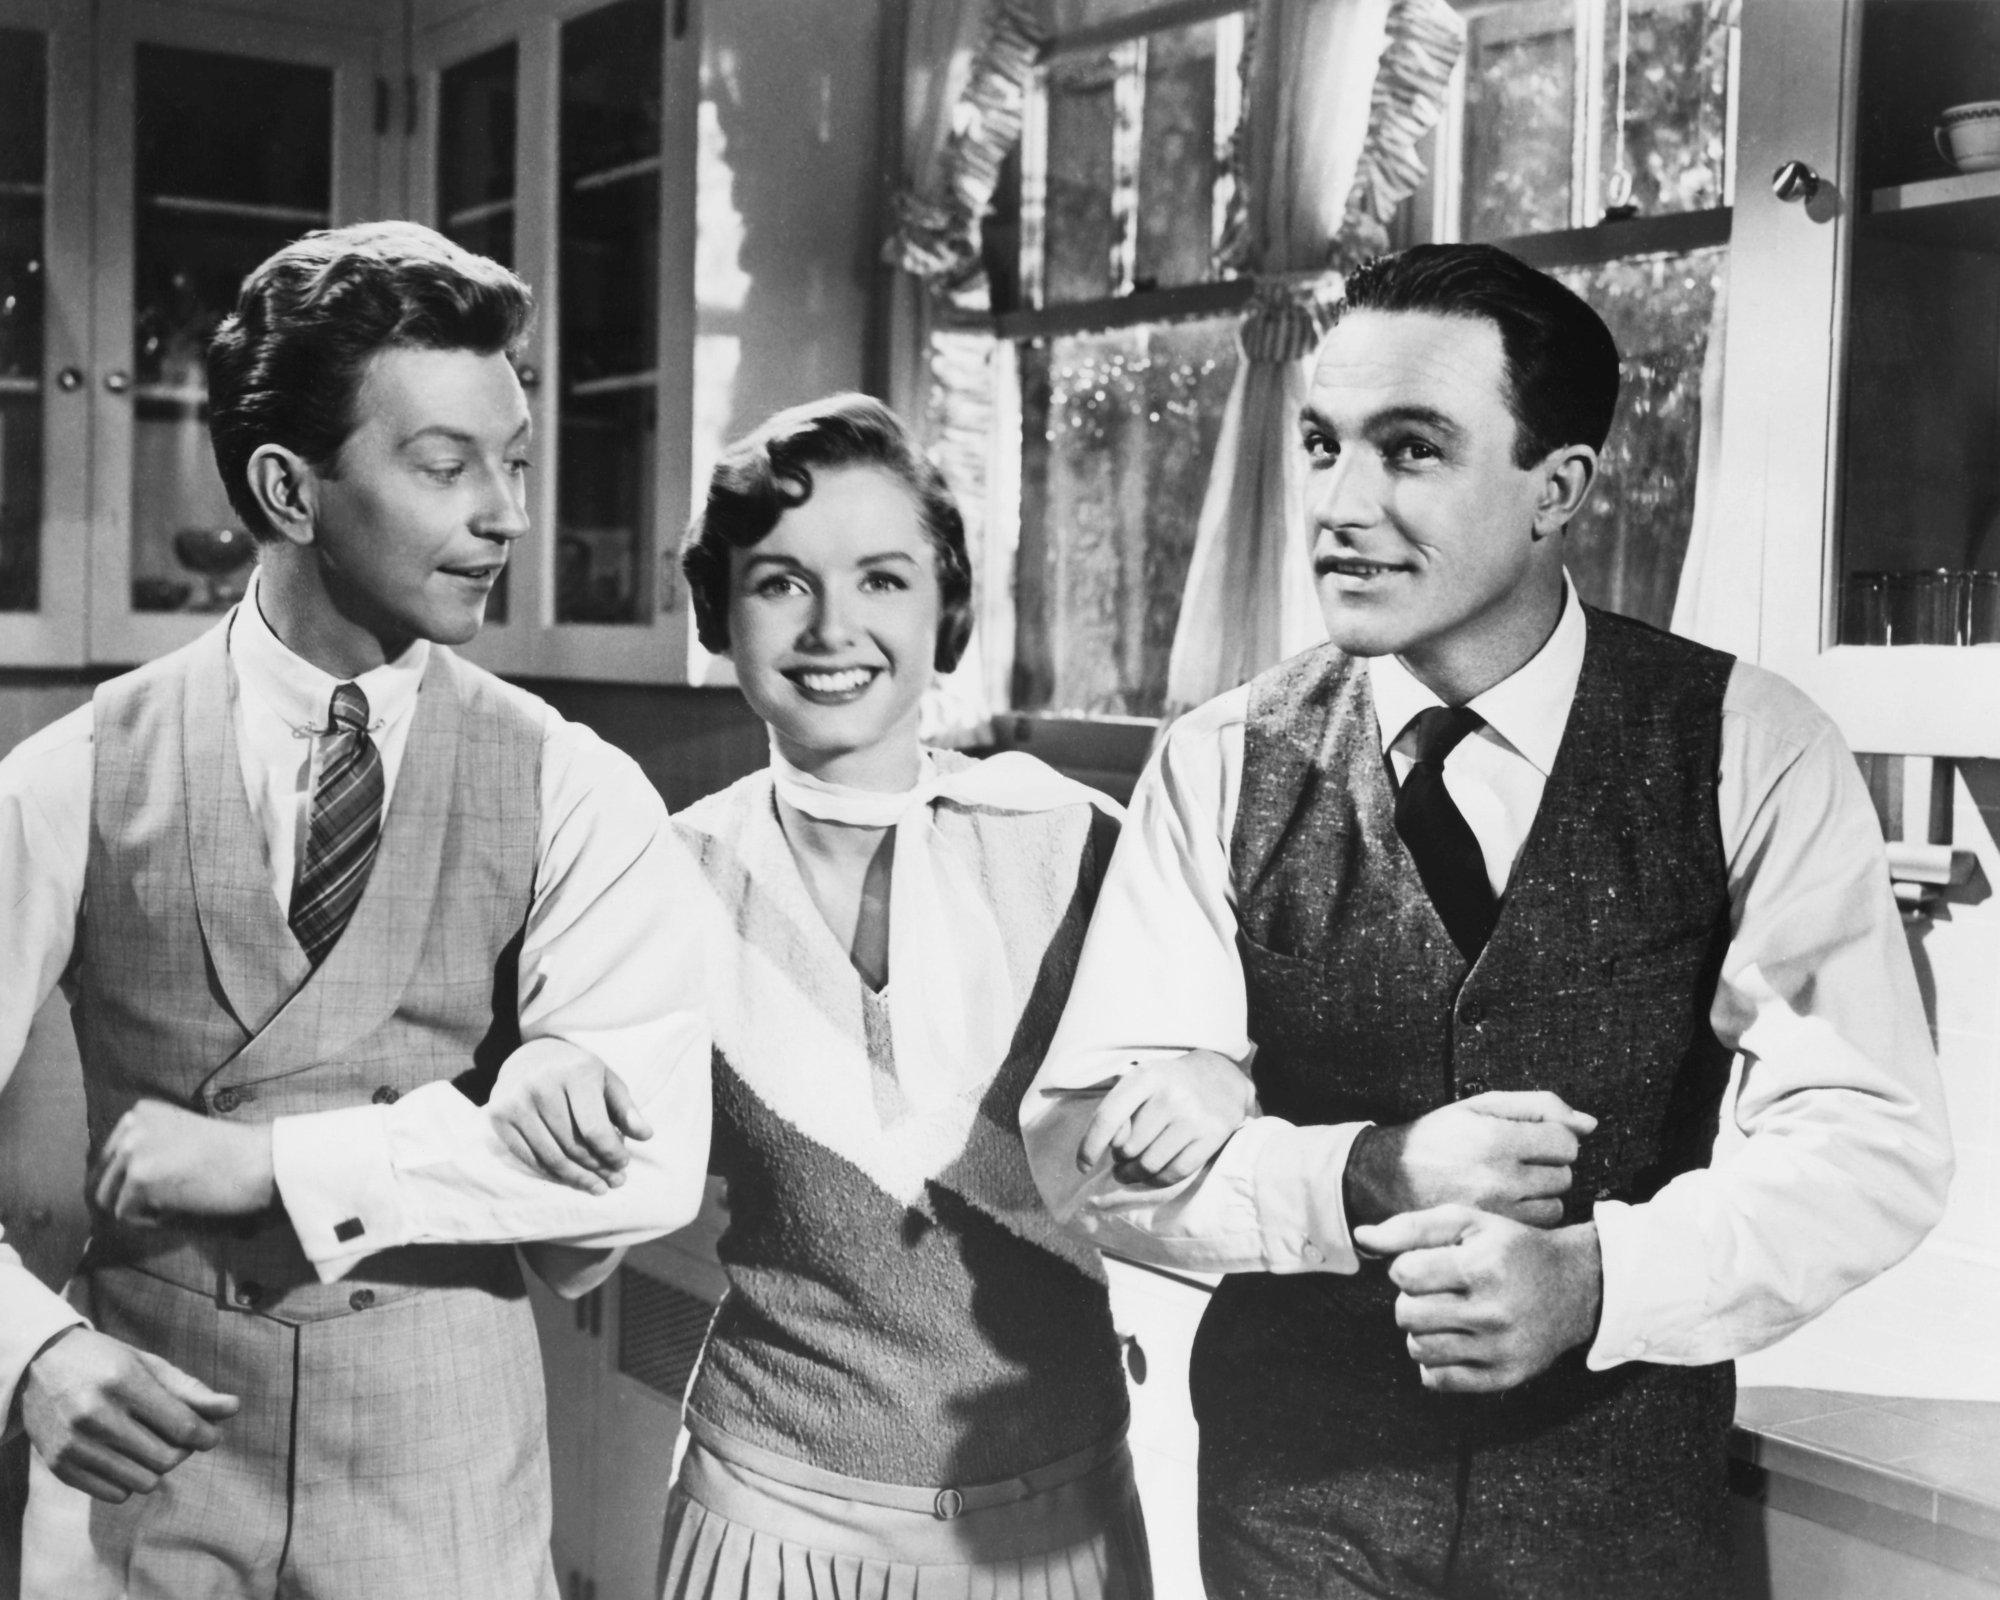 'Singin' in the Rain' Donald O'Connor as Cosmo Brown, Debbie Reynolds as Kathy Selden, and Gene Kelly as Don Lockwood during 'Good Morning' sequence smiling and linking arms